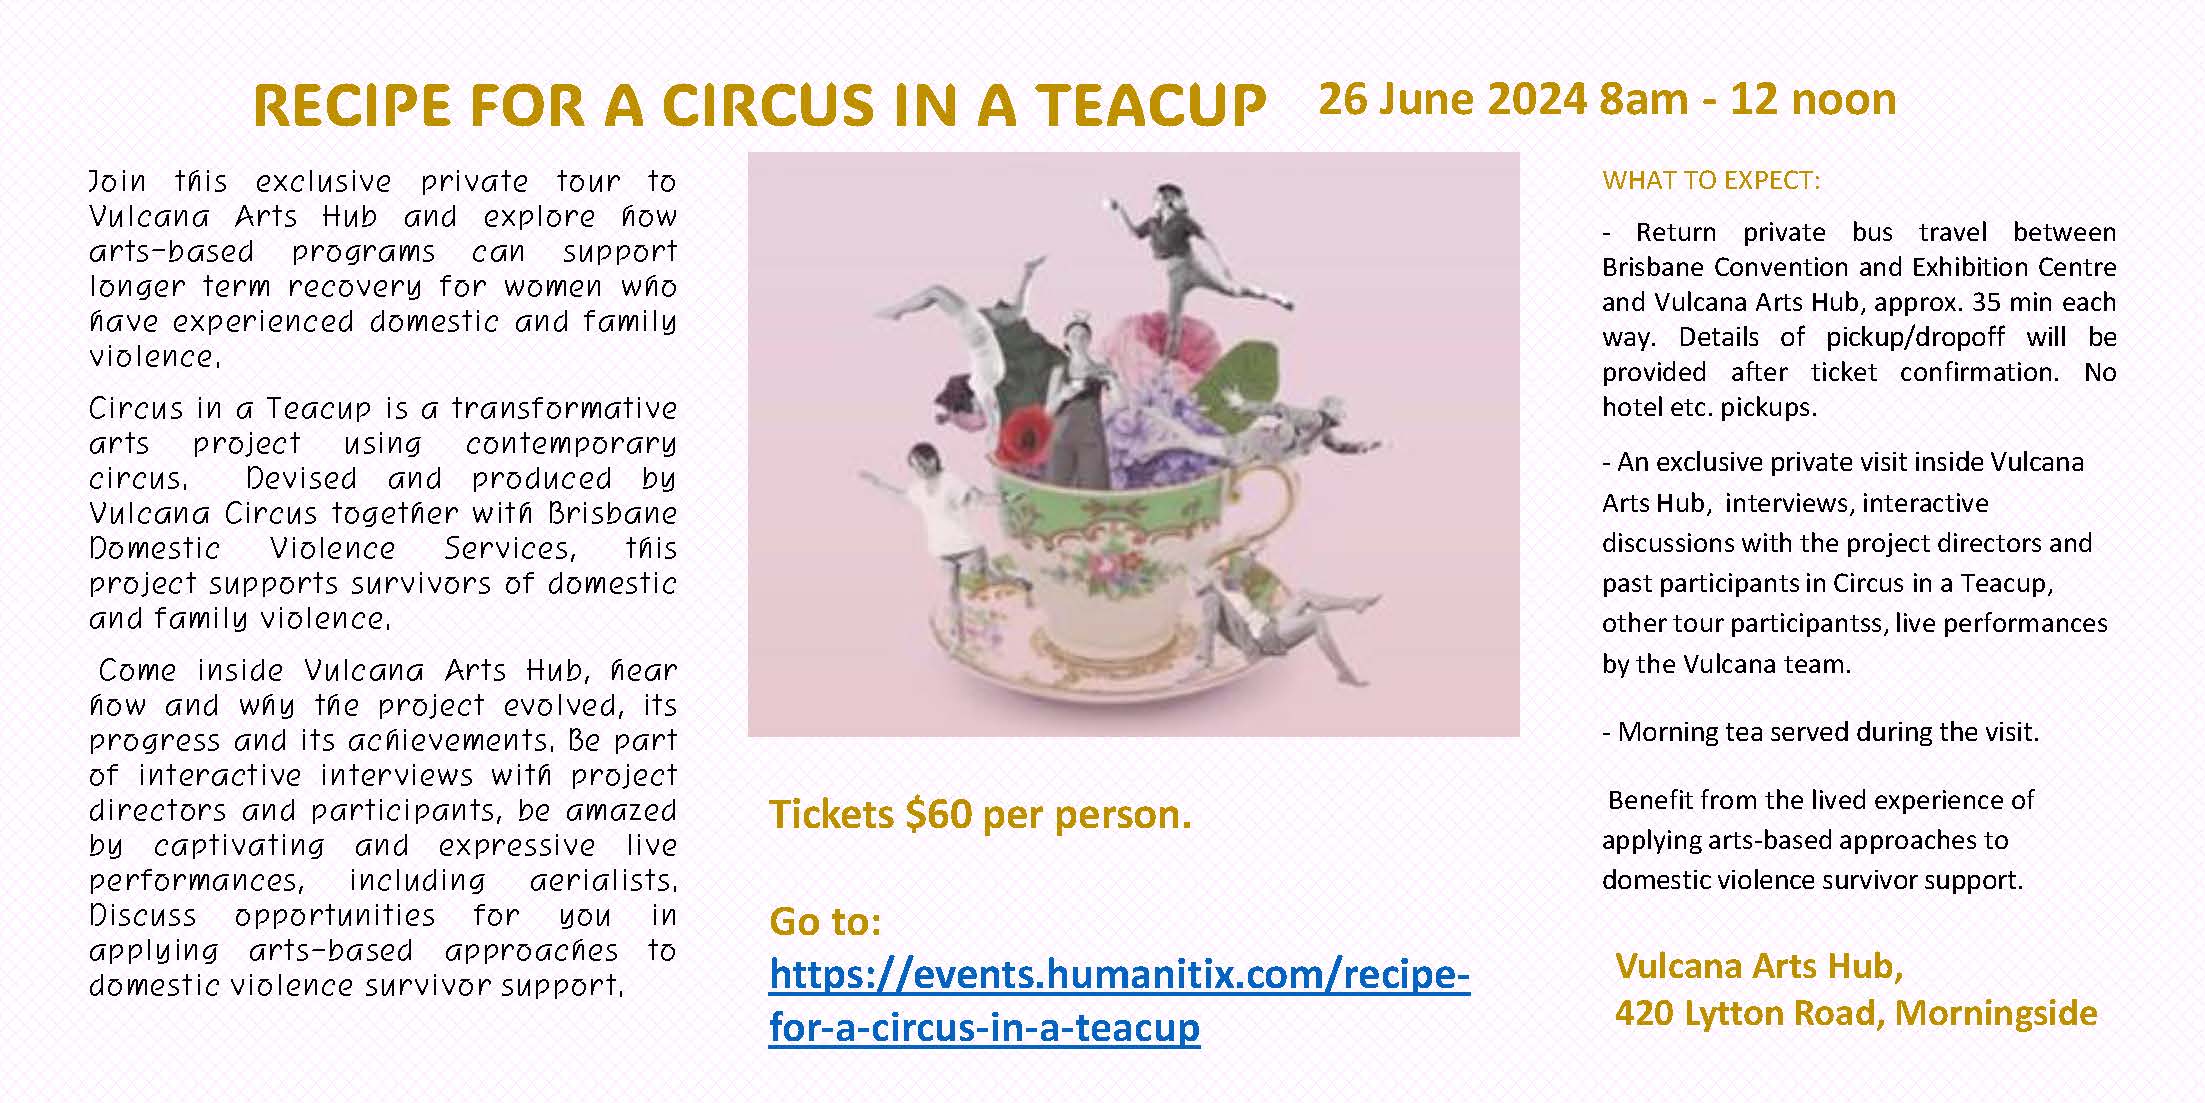 ZI Convention Tour - Recipe for a Circus in a Teacup @ ZI Convention Tour